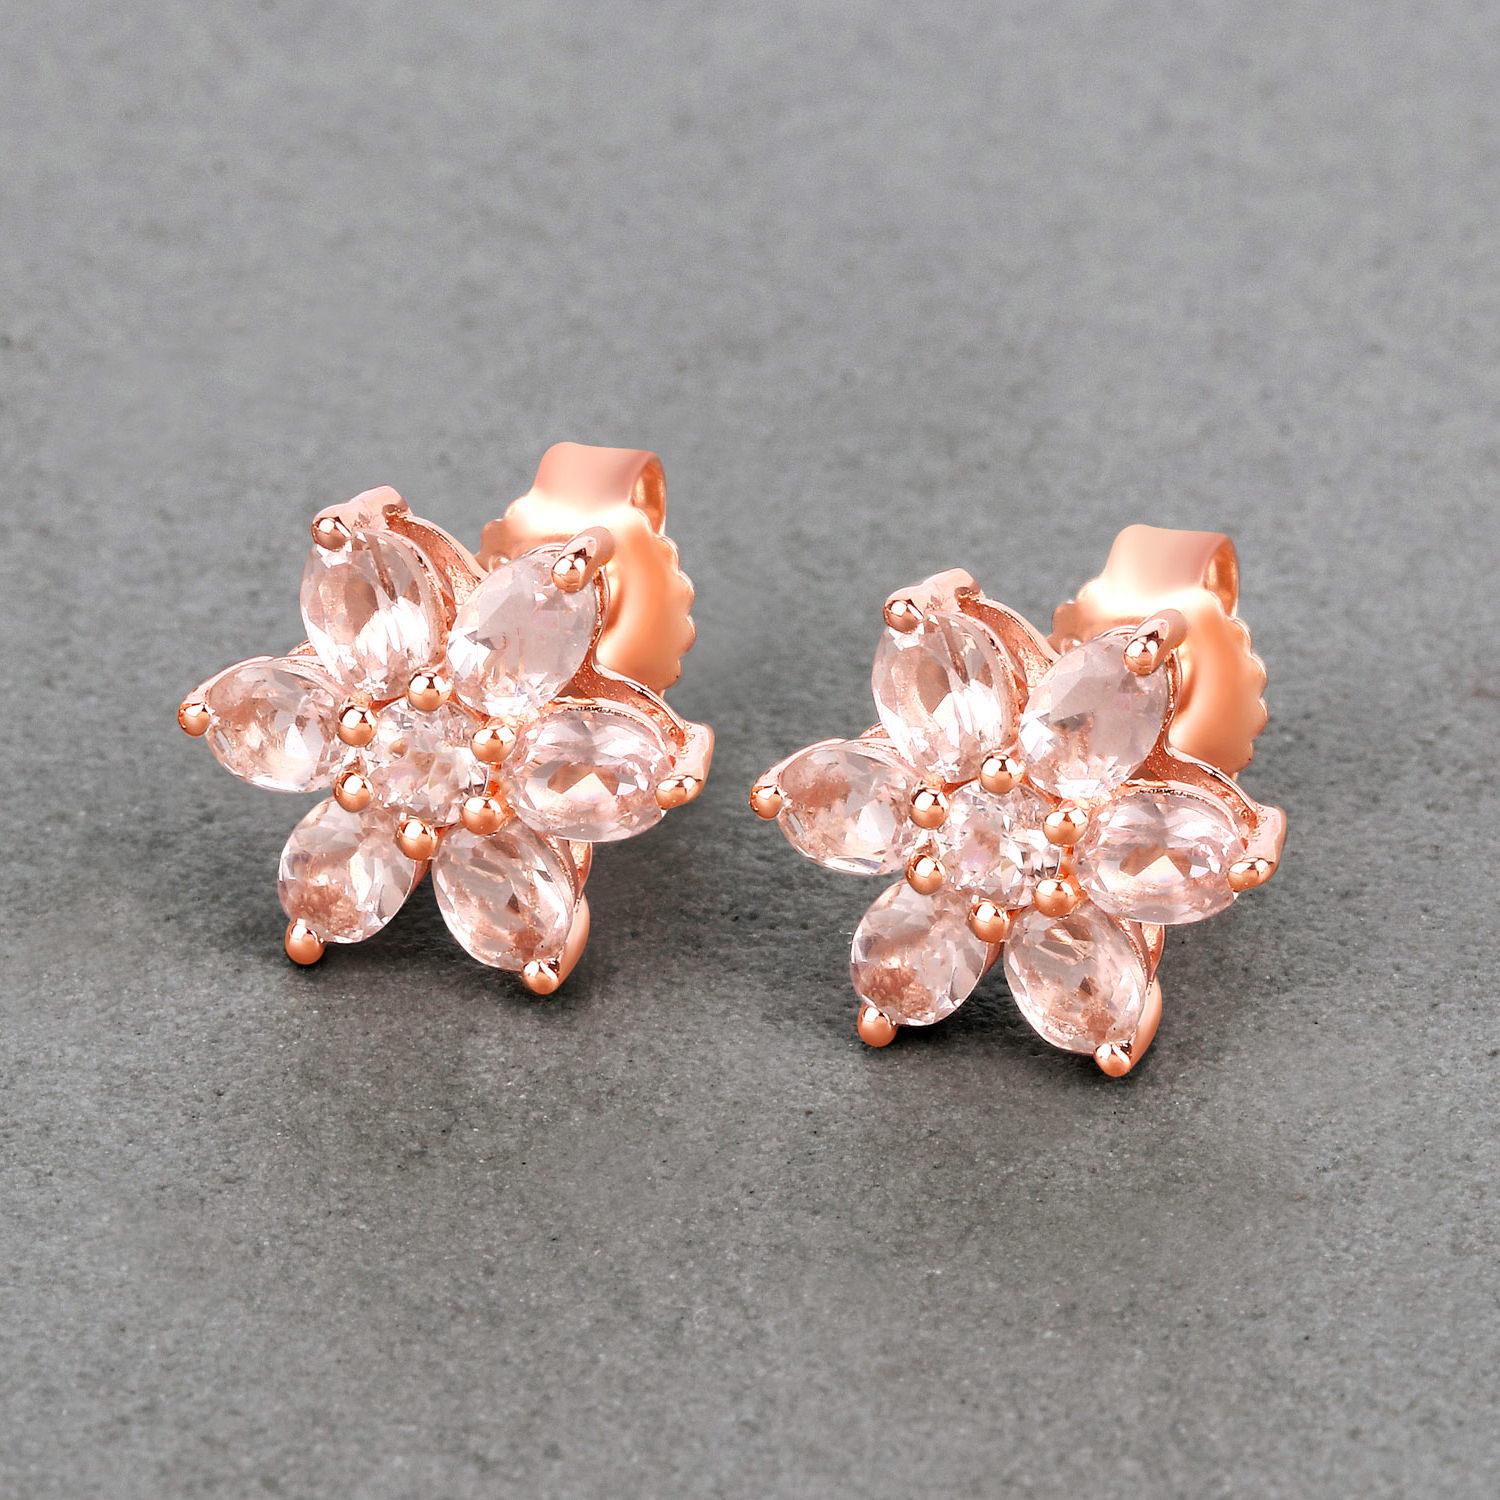 Mixed Cut Morganite Floral Stud Earrings 1.98 Carats 10K Rose Gold For Sale